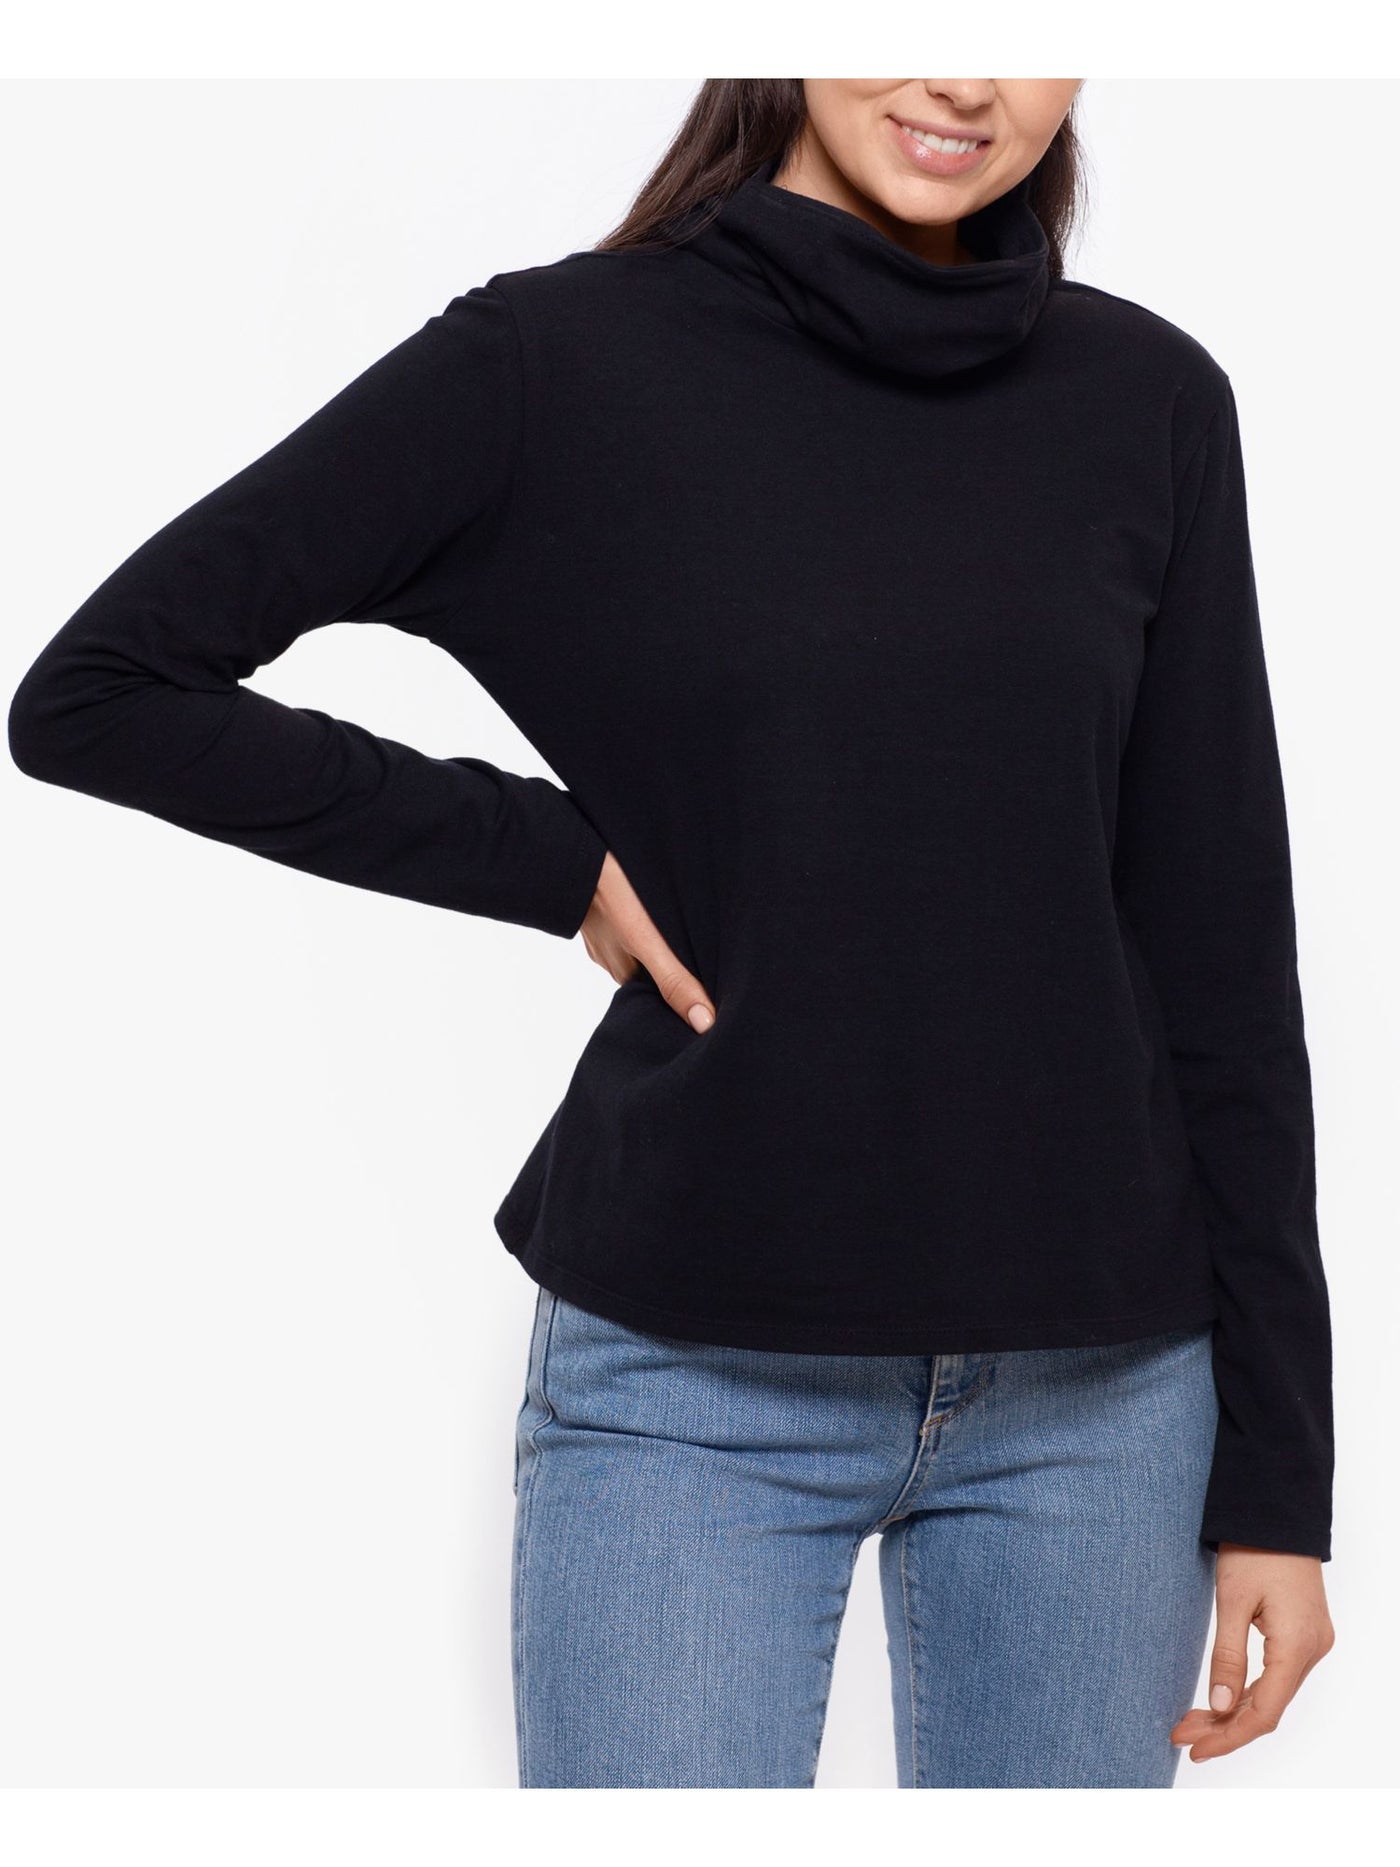 BAM BY BETSY & ADAM Womens Black Cotton Blend Long Sleeve Turtle Neck Top S